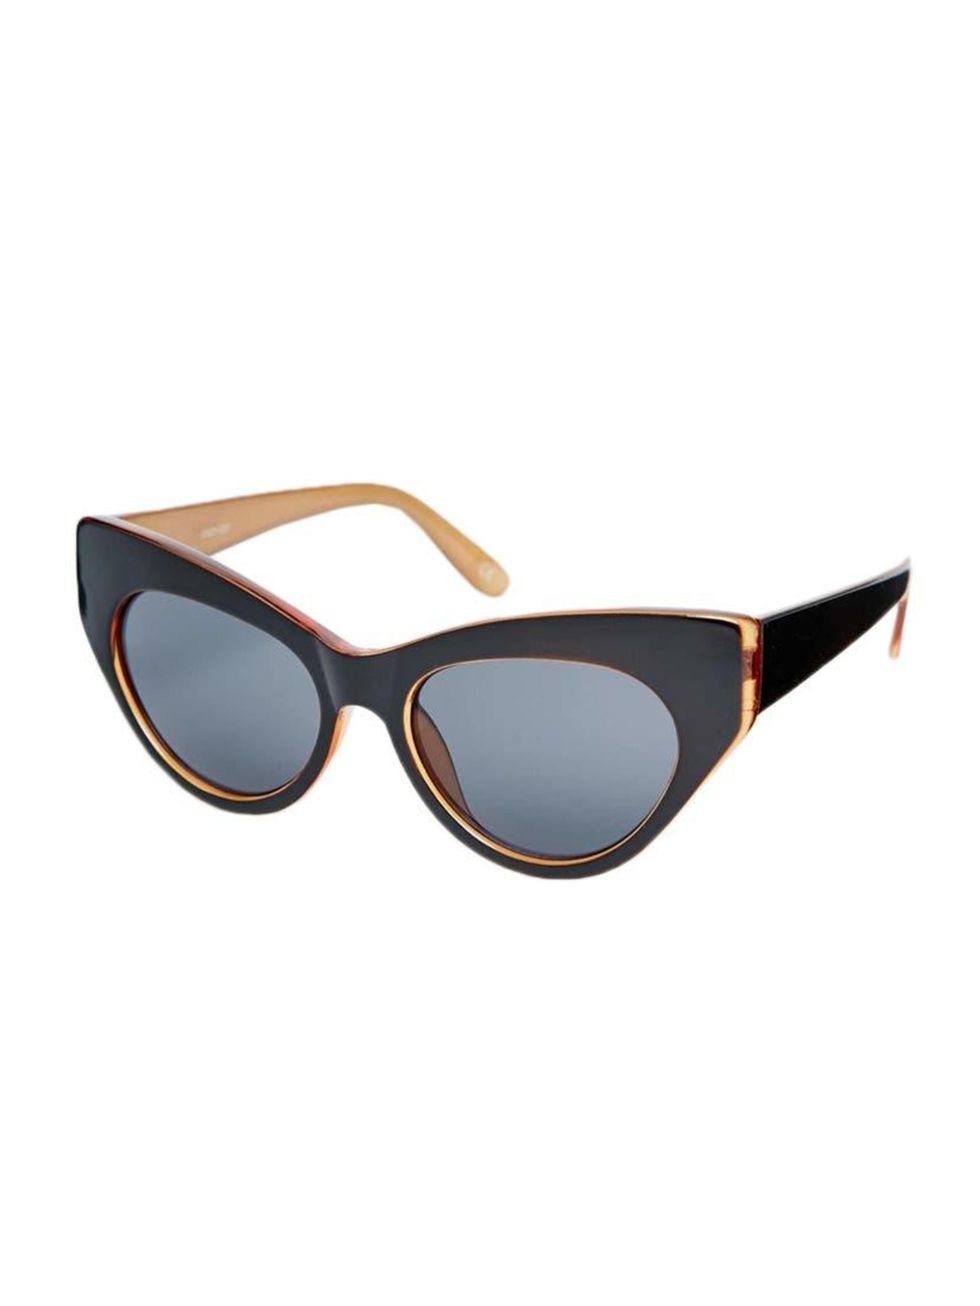 <p>Digital Director Phebe Hunnicutt will match these graphic sunnies to her graphic haircut.</p>

<p><a href="http://www.asos.com/ASOS/ASOS-Chunky-Exaggerated-Cat-Eye-Sunglasses/Prod/pgeproduct.aspx?iid=4697471&cid=6992&sh=0&pge=1&pgesize=36&sort=-1&clr=B